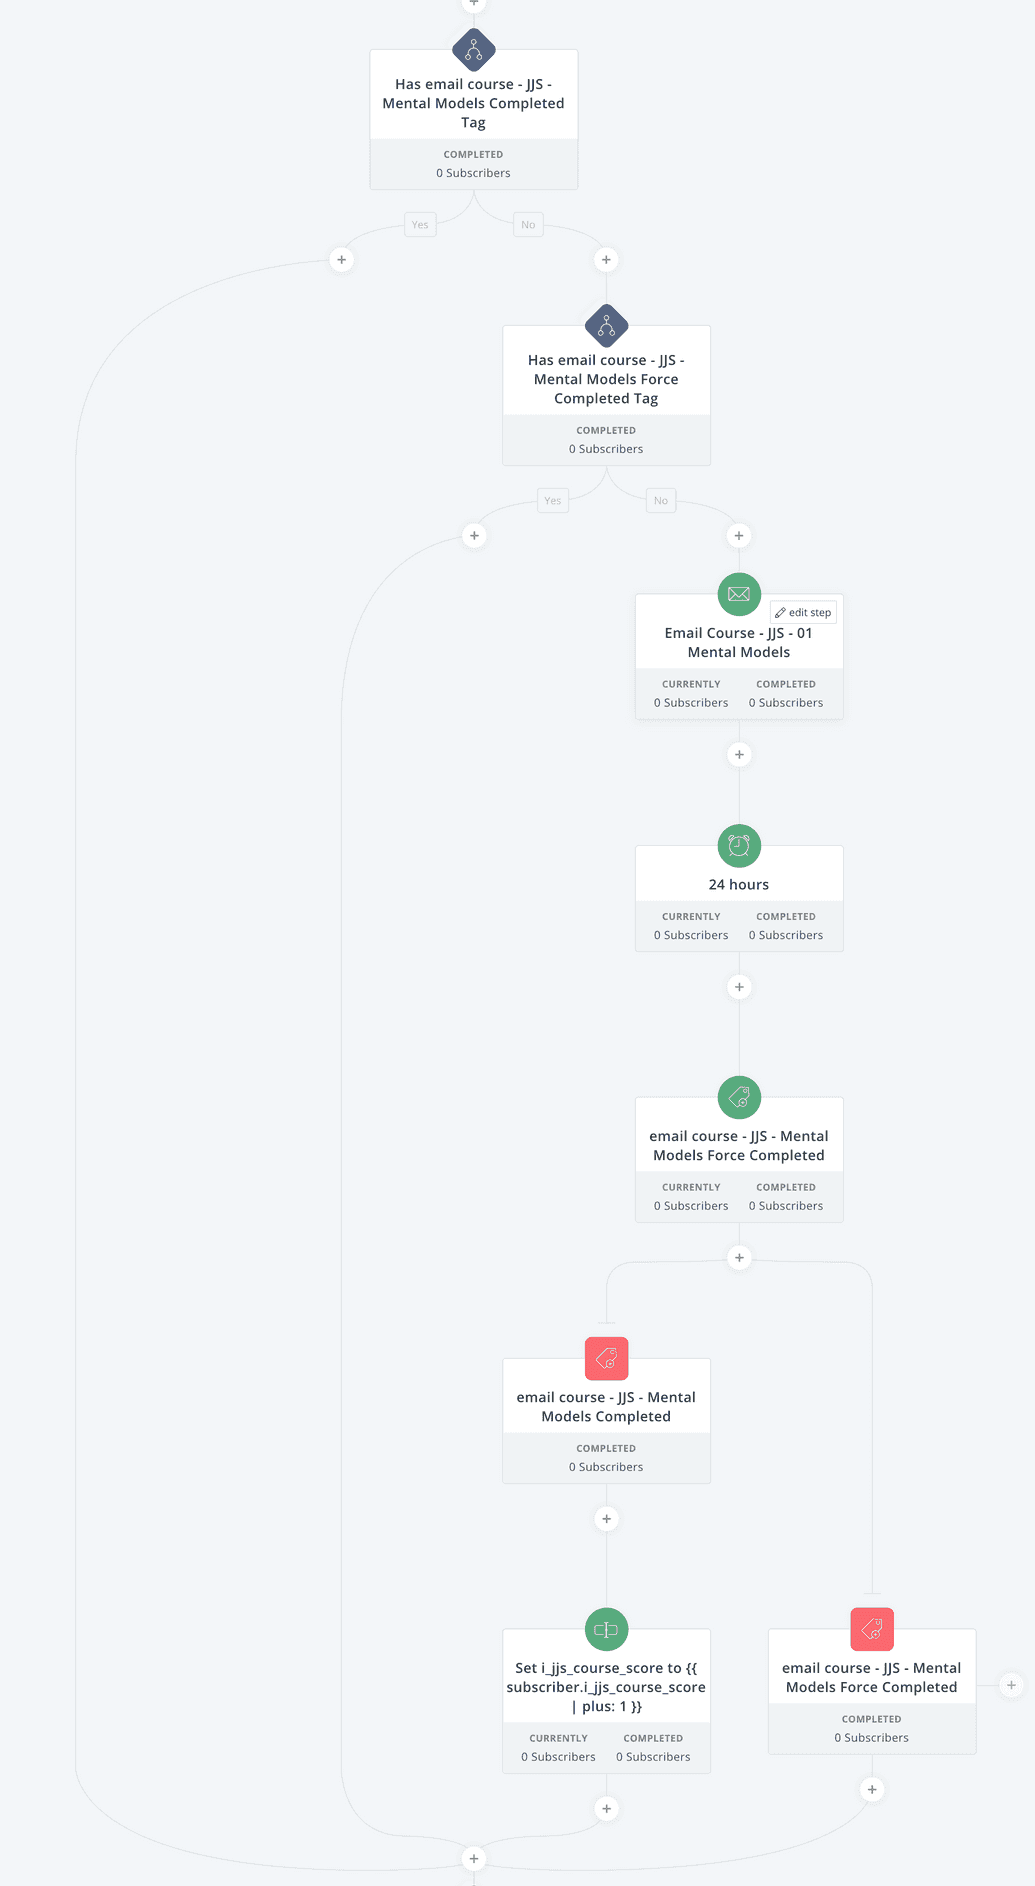 convertkit workflow that shows conditional checking of properties and the resulting routes in the workflow